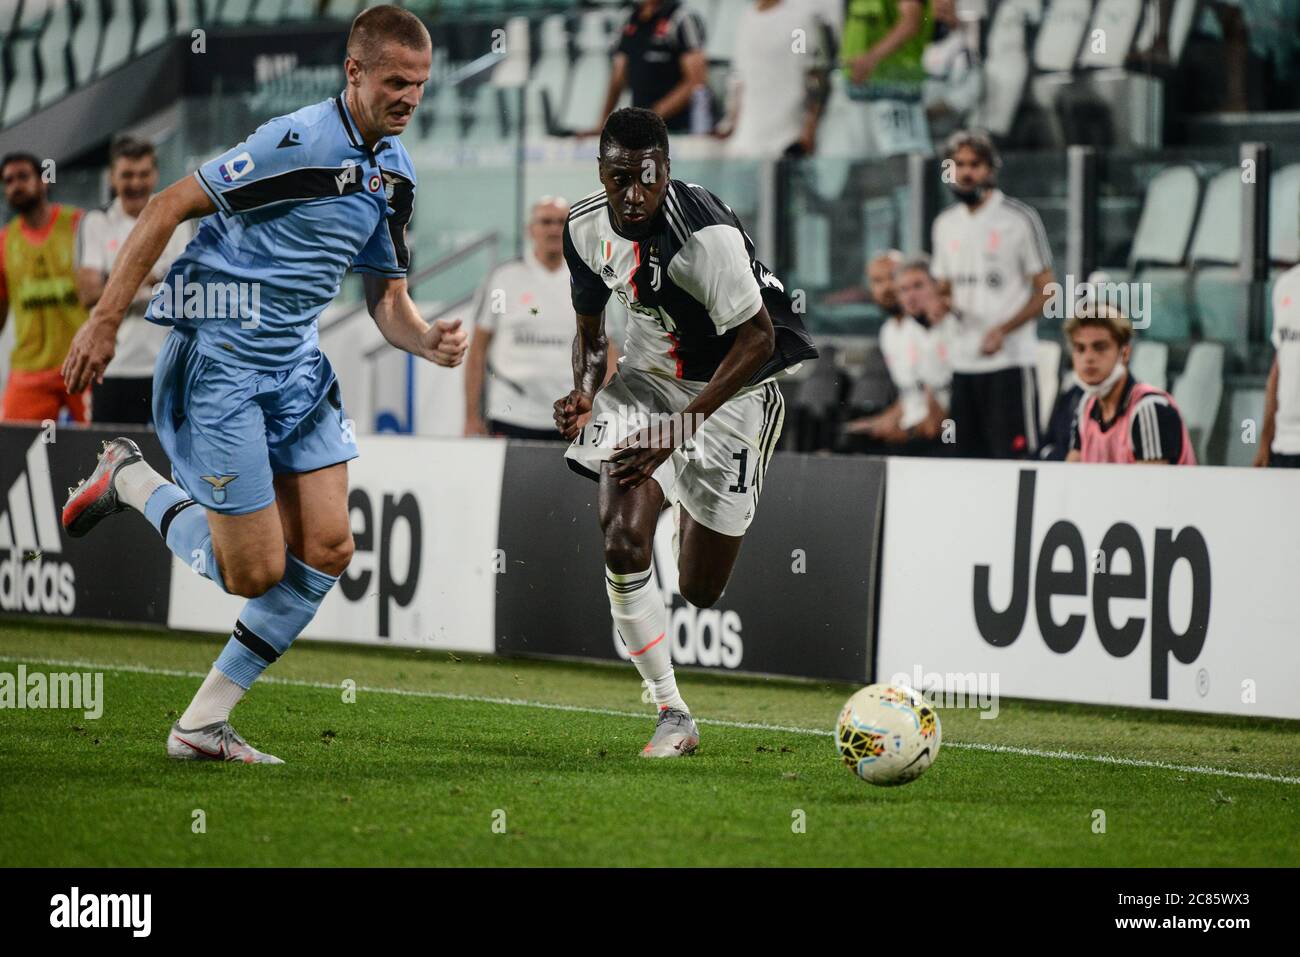 Turin, Italy. 20th July, 2020. Blaise Matuidi of Juventus in action during The Serie A football Match Juventus FC vs Lazio. Juventus FC won 2-1 over Lazio at Allianz Stadium, in Turin, Italy on July 20, 2020. (Photo by Alberto Gandolfo/Pacific Press/Sipa USA) Credit: Sipa USA/Alamy Live News Stock Photo